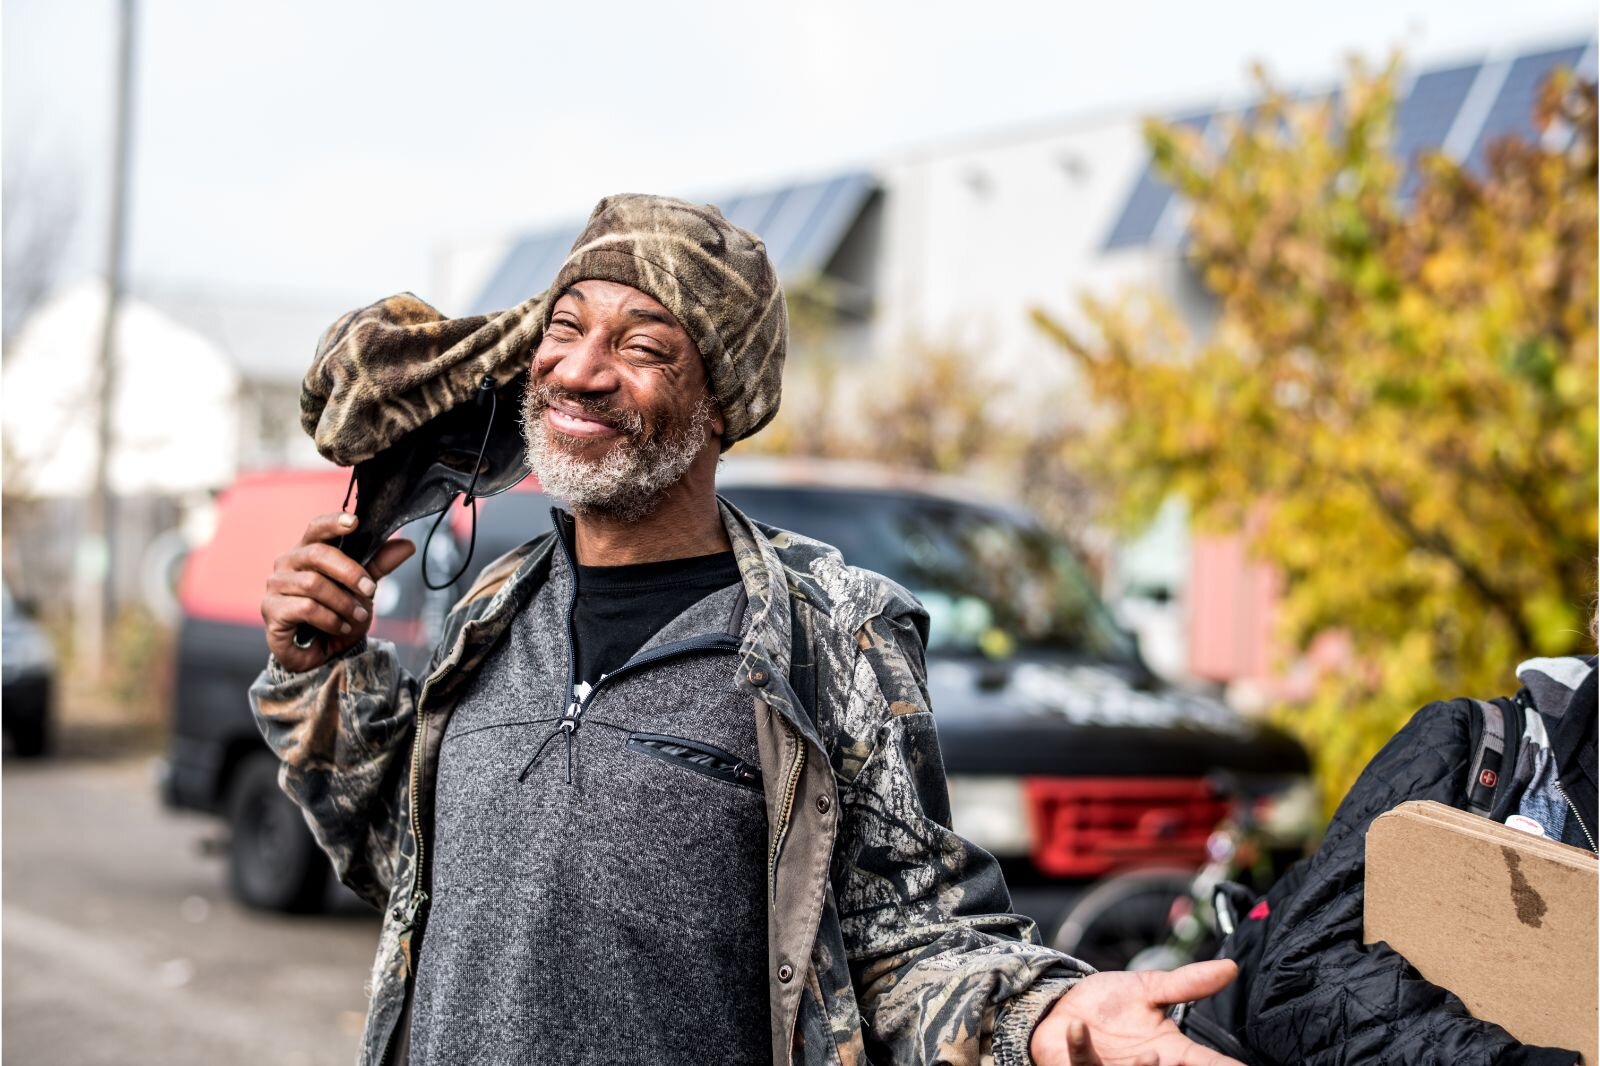 "We try to start with working on that trauma a little bit by utilizing a more-compassionate approach, by taking care of their medical problems as well as addressing their social situation," says Dr. Sravani Alluri, Street Medicine Kalamazoo Director.